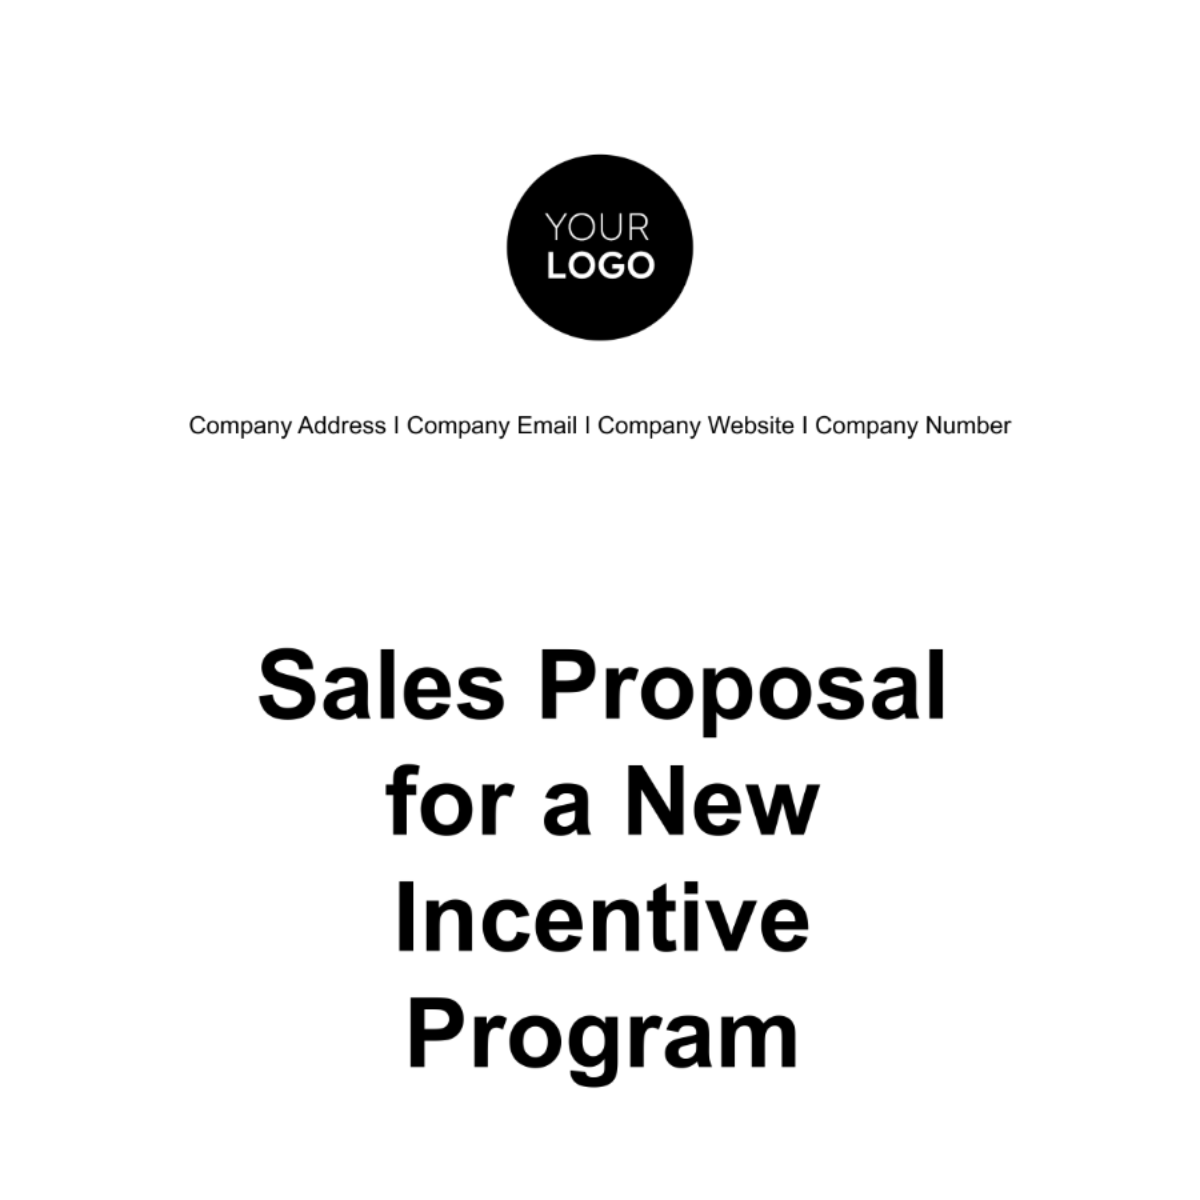 Sales Proposal for a New Incentive Program Template